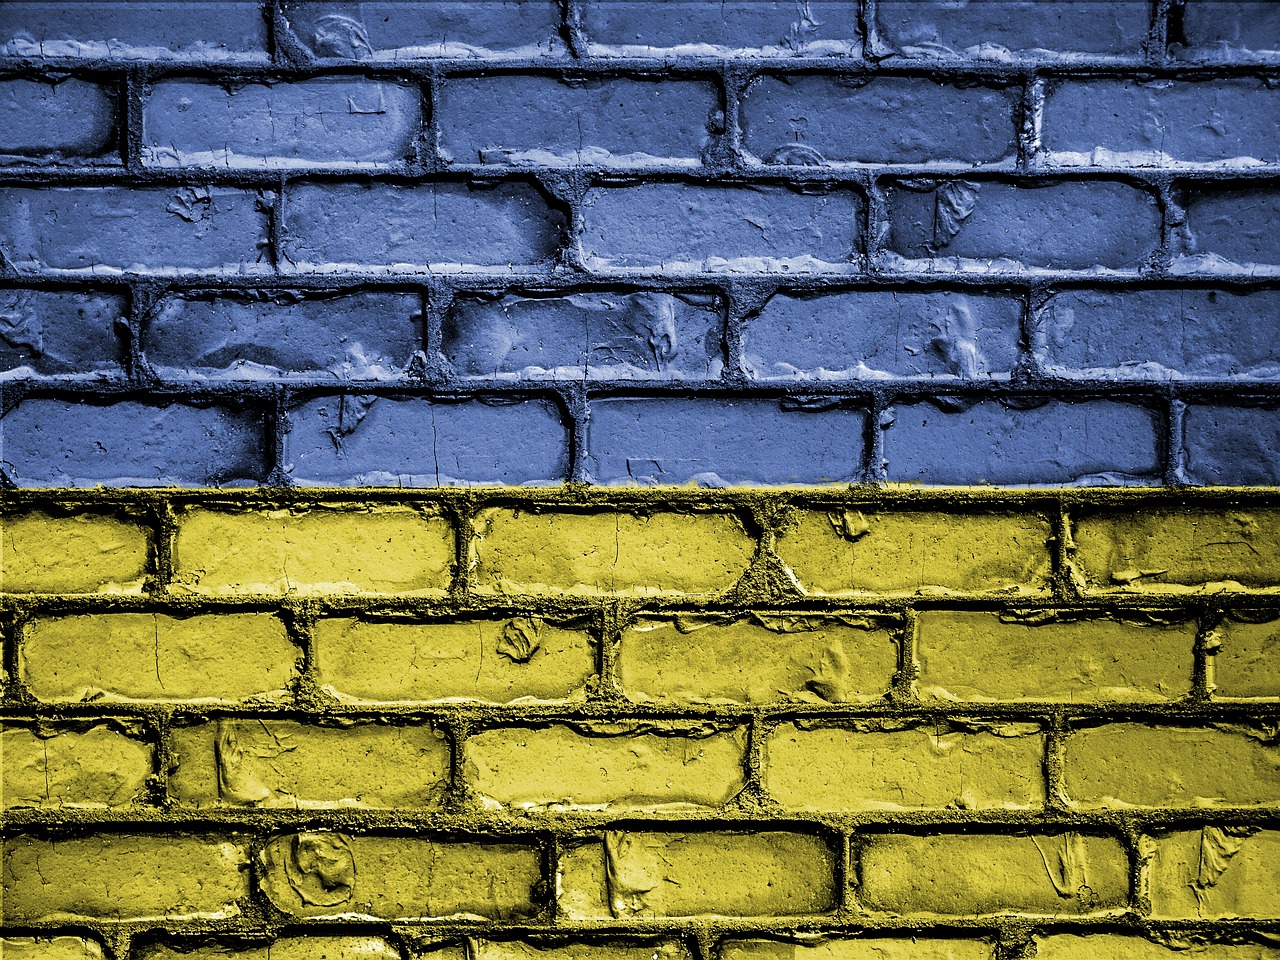 Ukraine High Ranking Officer Shares Thoughts On Crypto Assets, Says It's Important